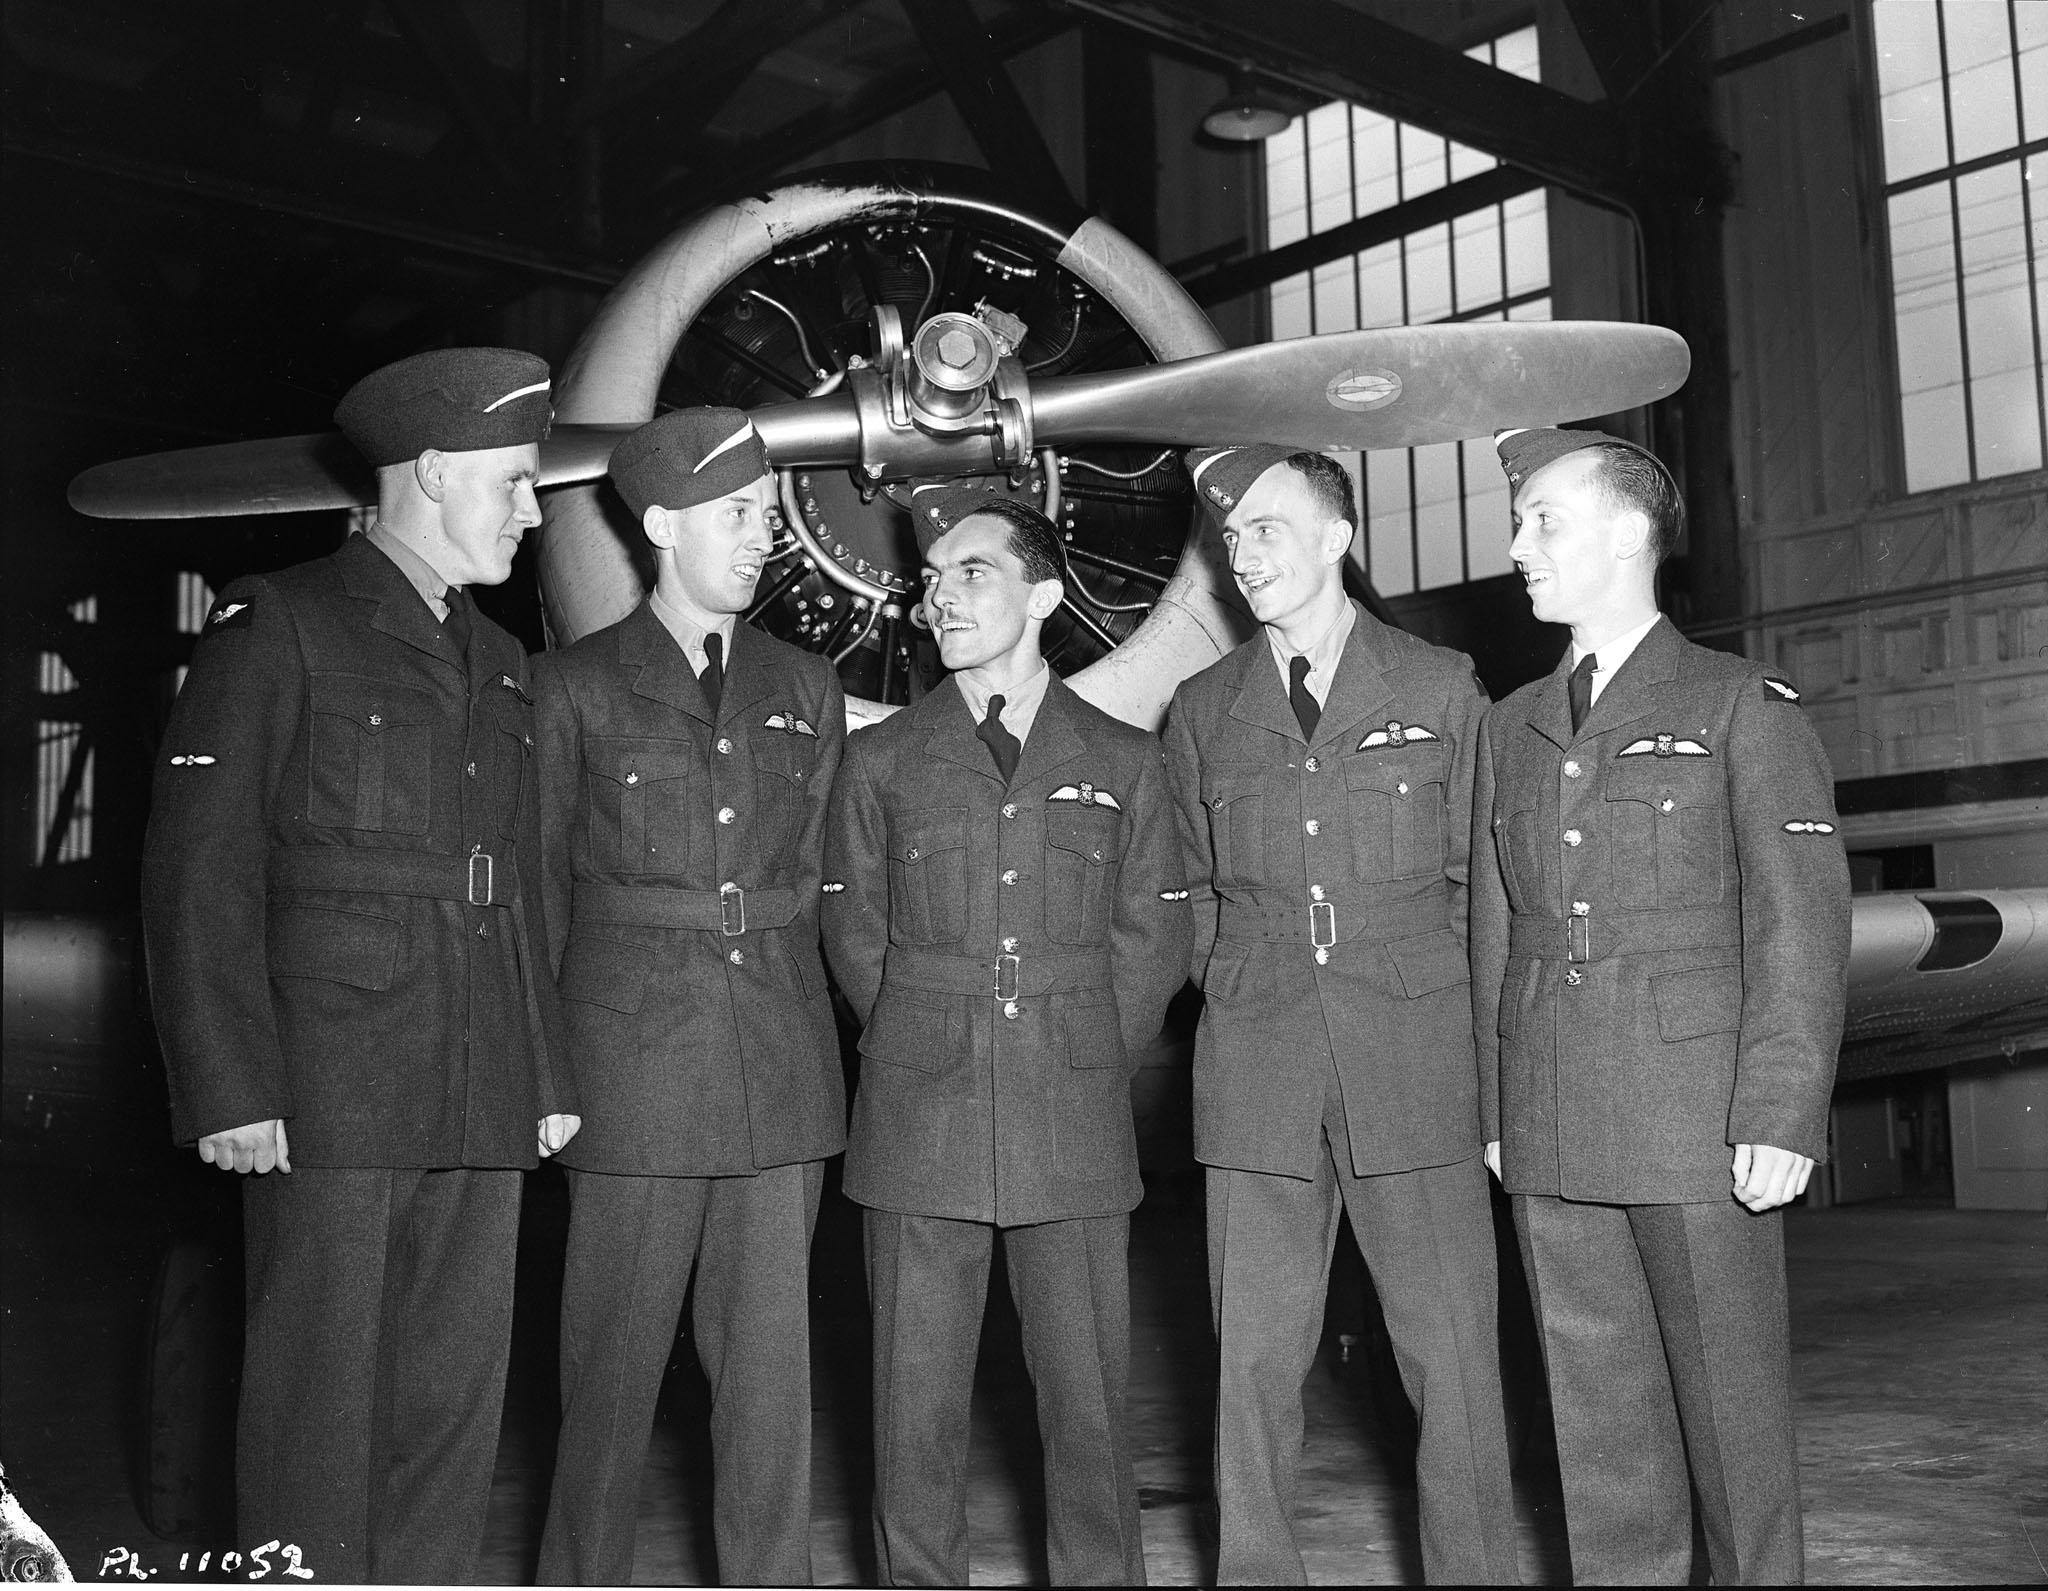 Toronto, Ontario, pilots Morrison (left), Nixon, Regan, Richards and Riddell stand for a photograph to commemorate their graduation from RCAF No. 2 Service Flying Training School at Uplands, Ontario, on August 28, 1942. PHOTO: DND Archives